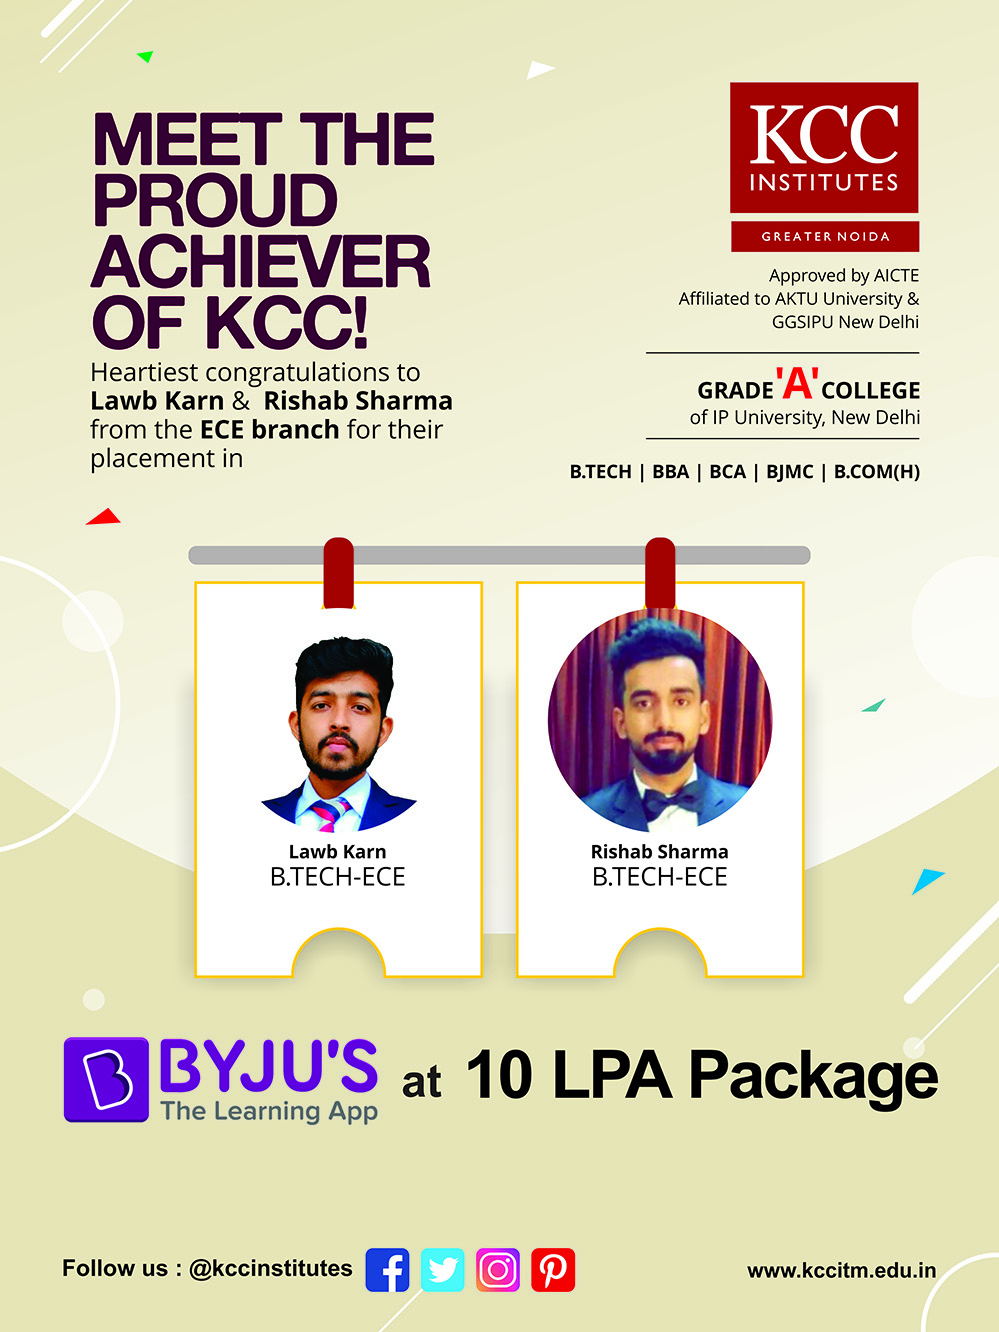 Congratulations!!! Lawb Karn and Rishab Sharma (B.Tech ECE Branch) for getting placed in BYJU'S at 10 LPA Package.